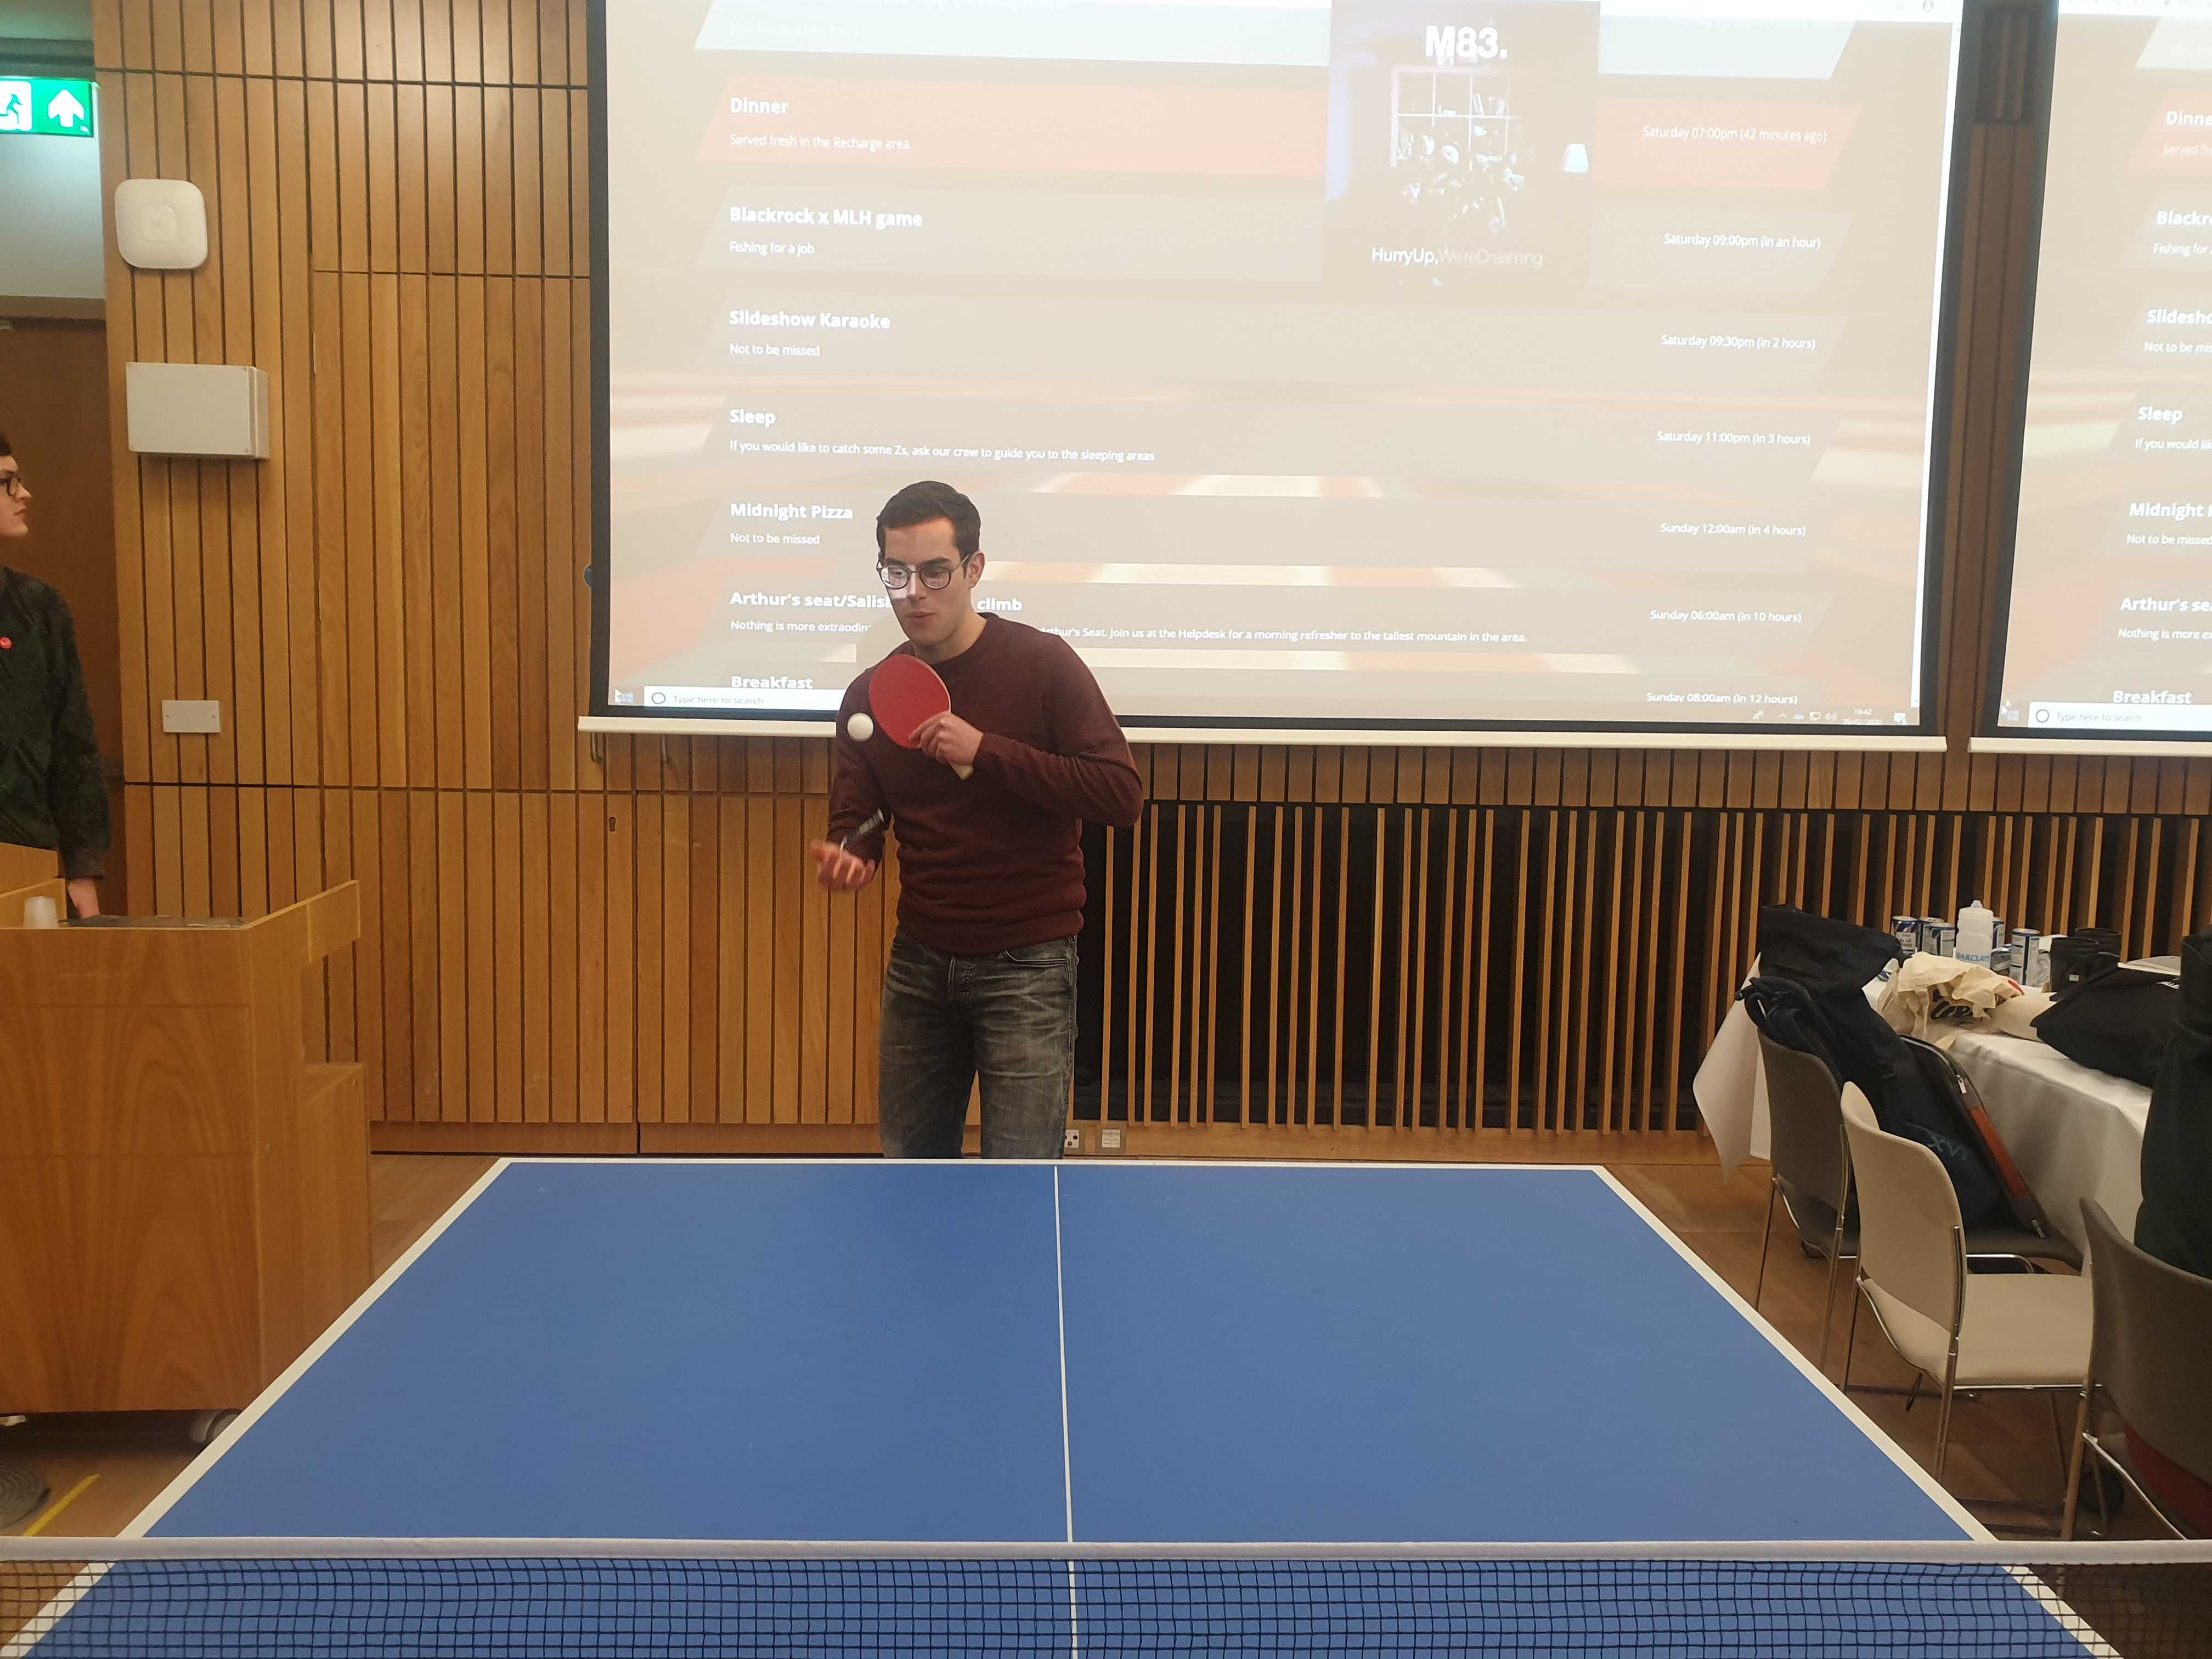 Marius and Charlie playing table tennis